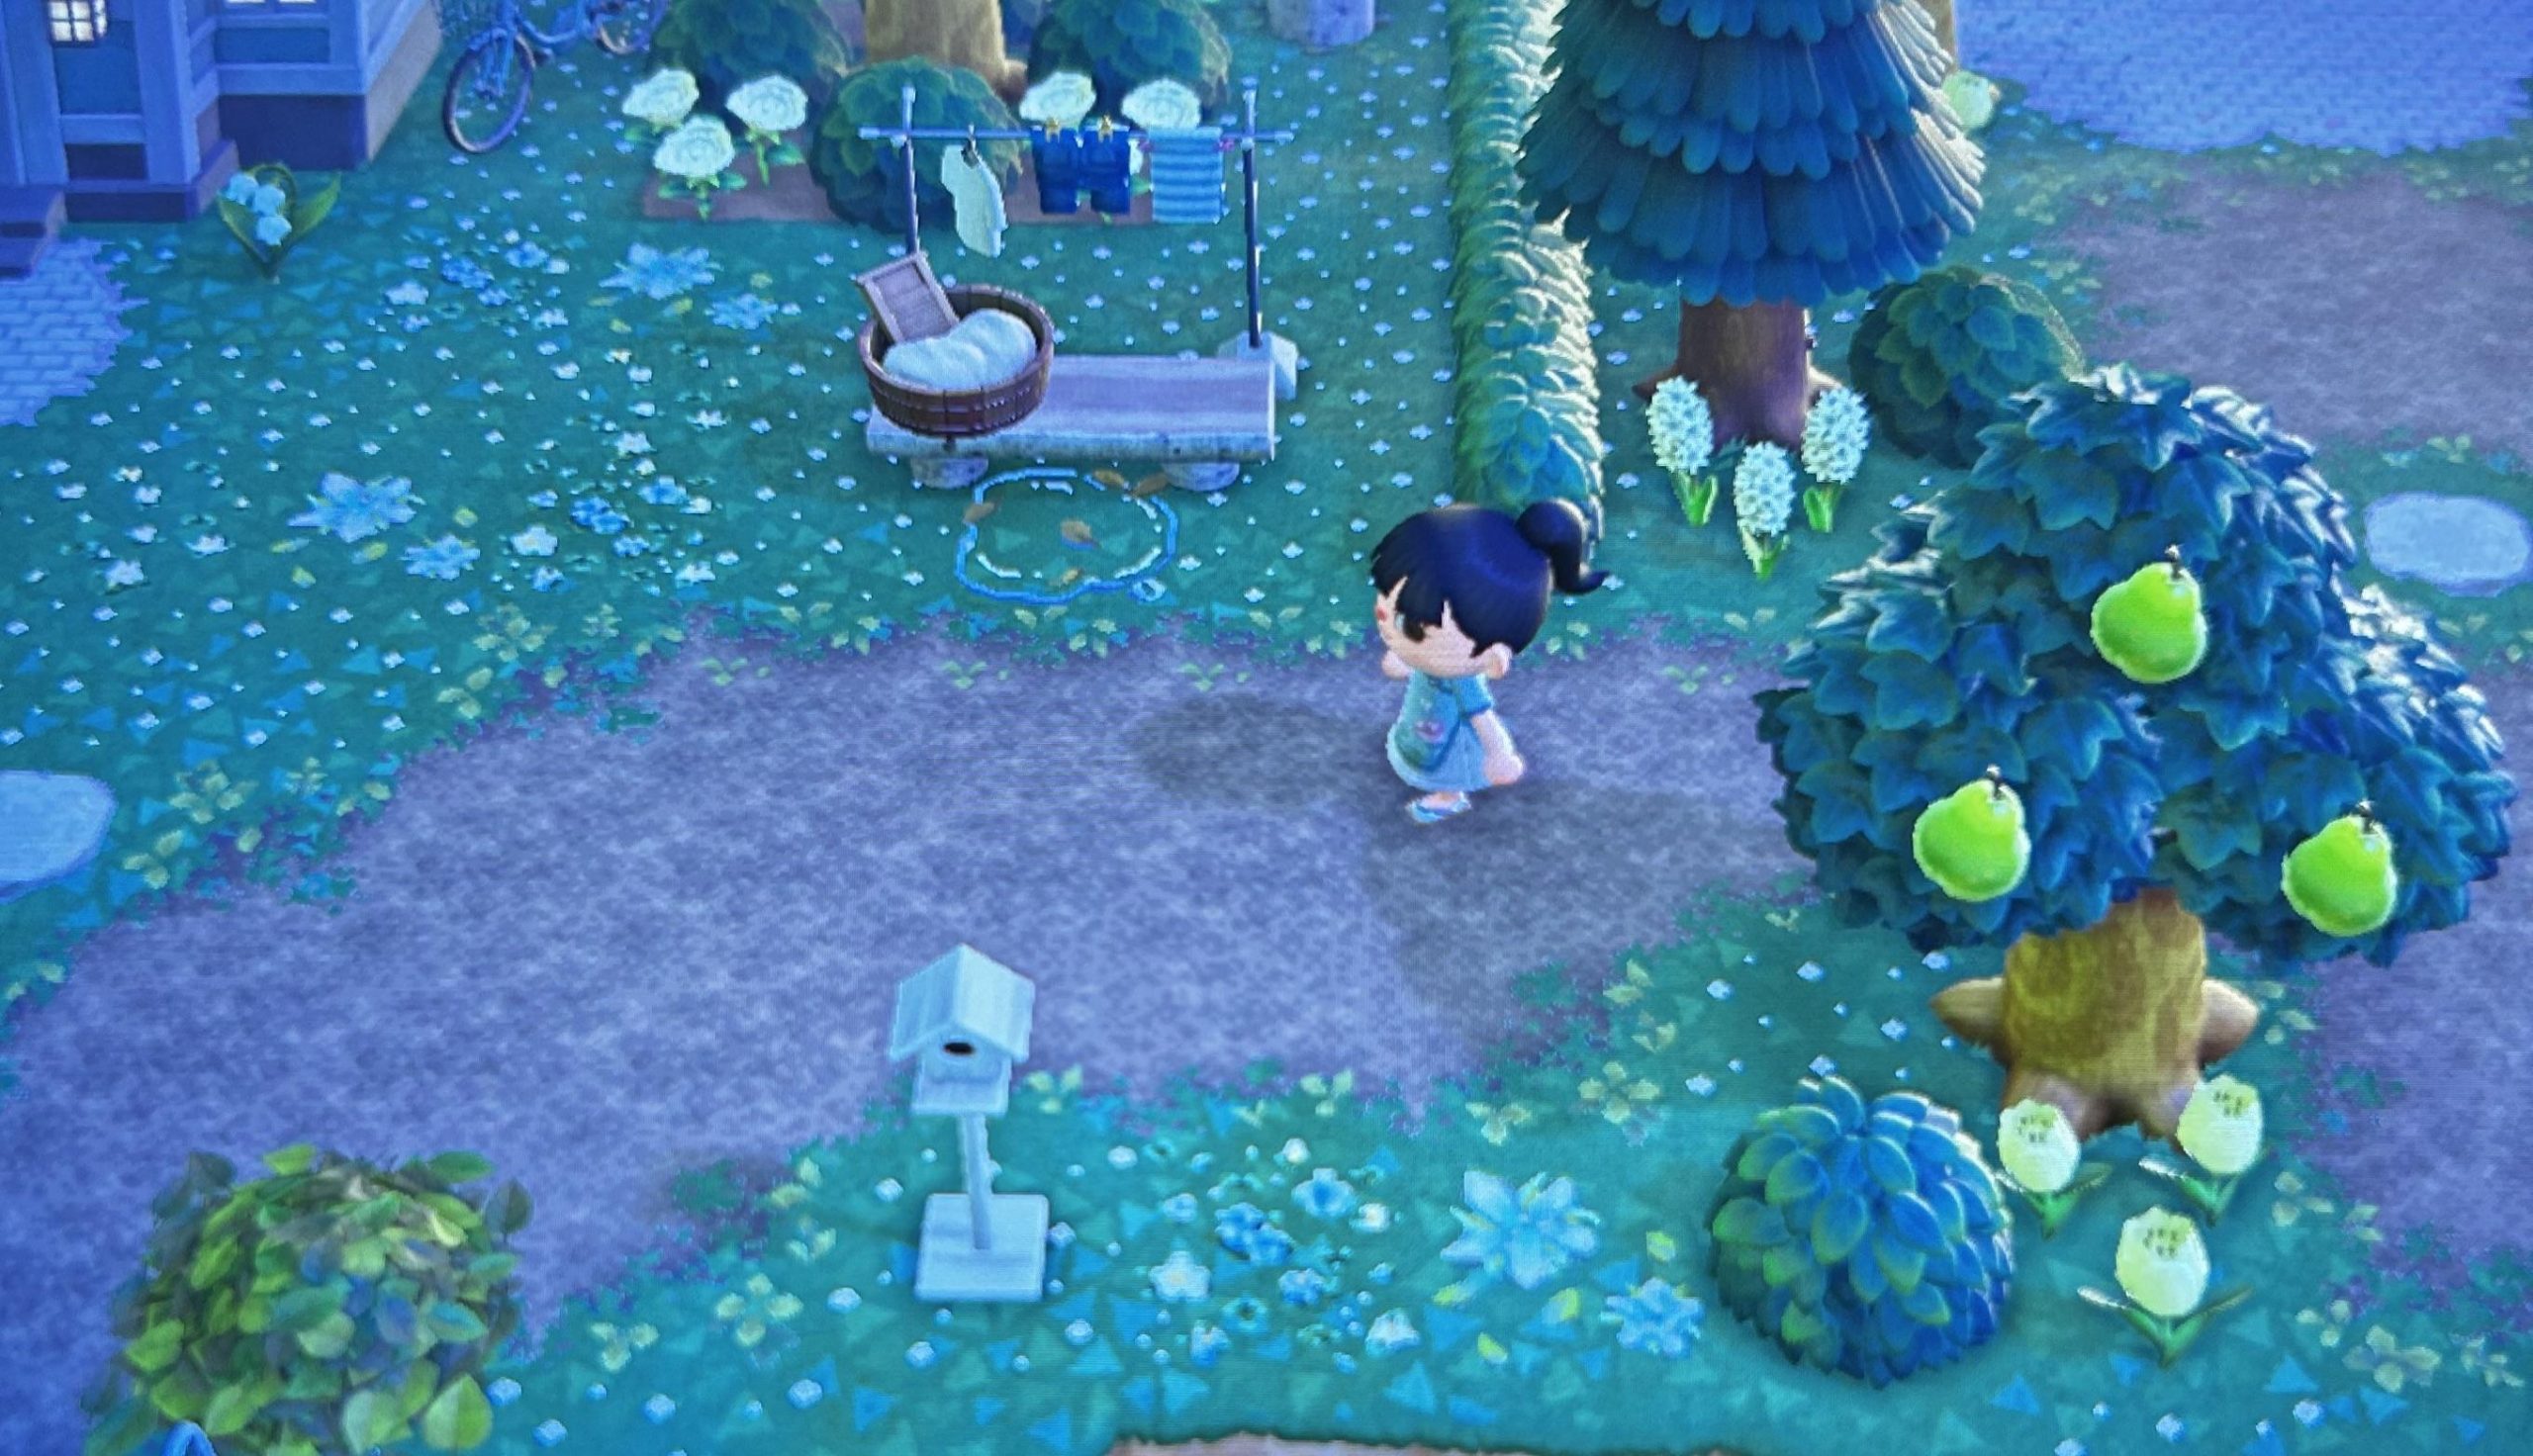 Anyone have the code for this dirt path or flowers??